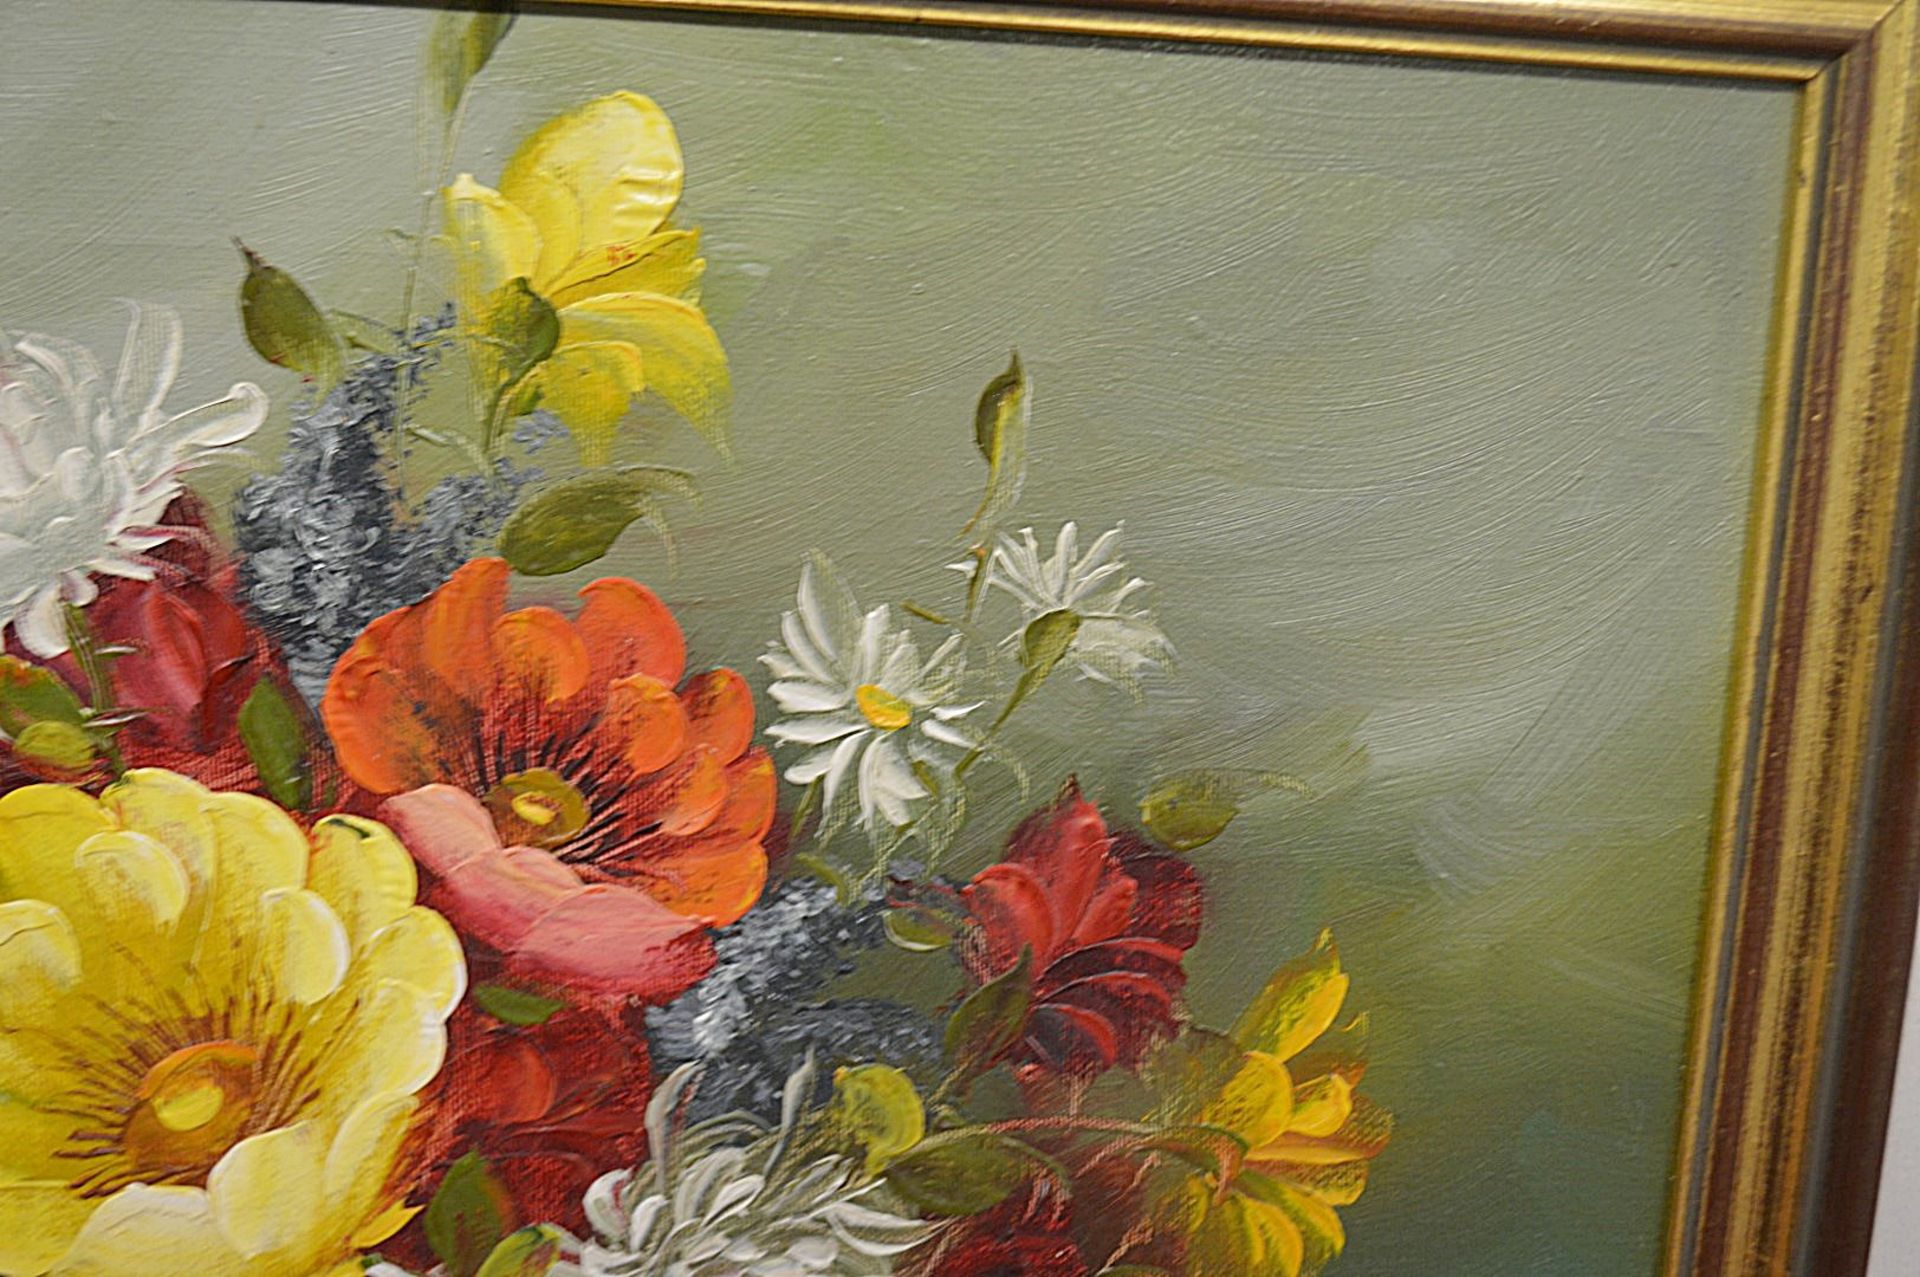 1 x Original Oil Painting Of Flowers On Canvas - Signed By The Artist - Dimensions: 36 x 46cm - Ref: - Image 4 of 6